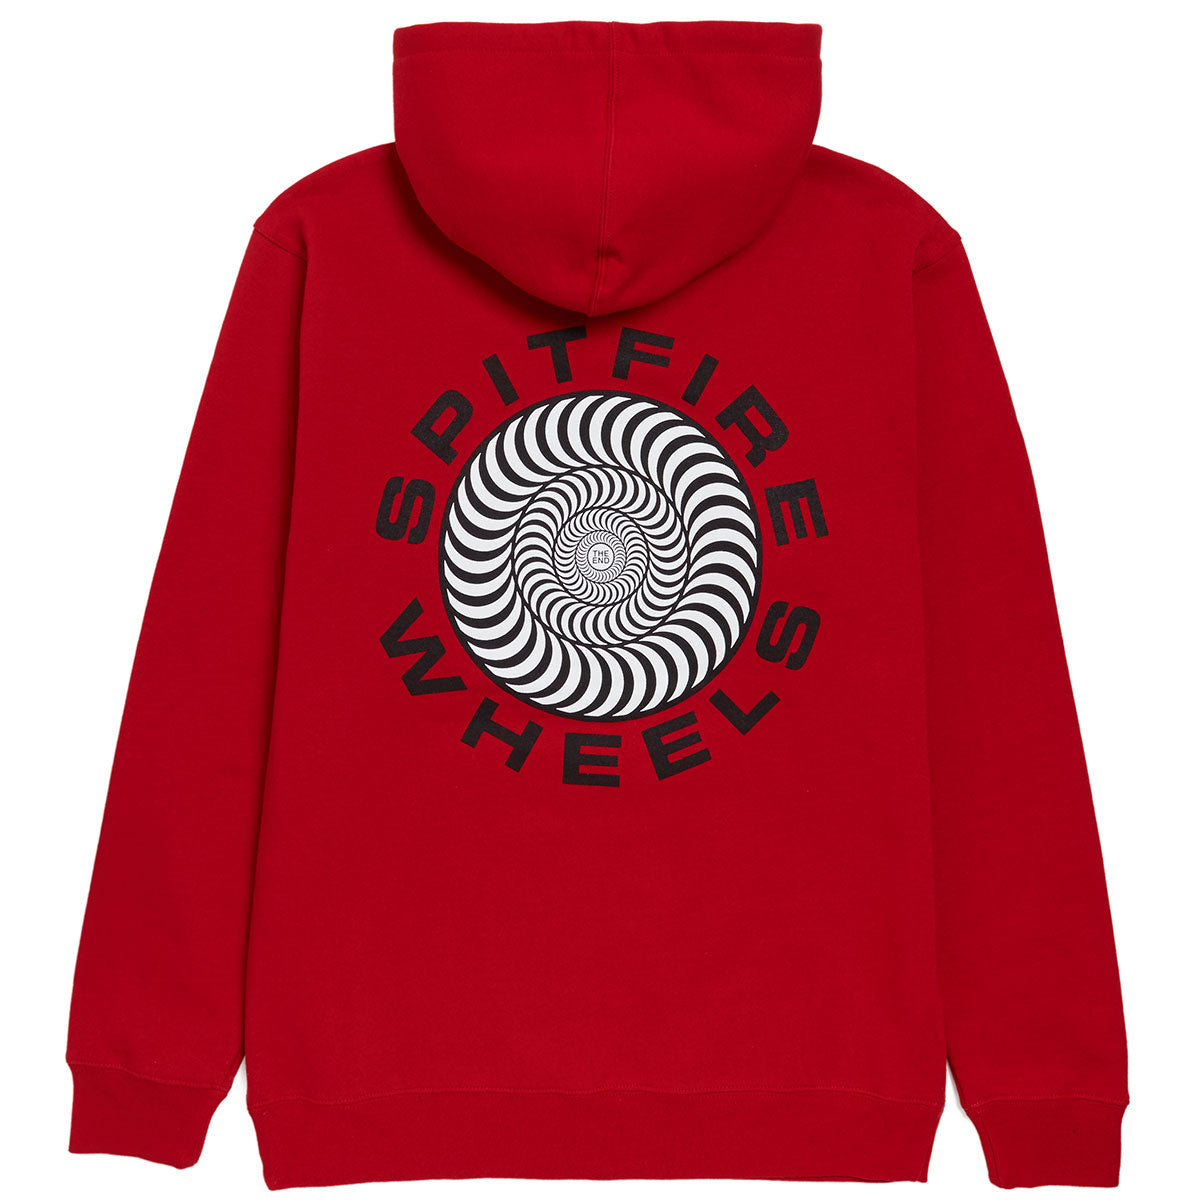 Spitfire Classic '87 Swirl Fill Hoodie - Scarlet/Black/White image 1